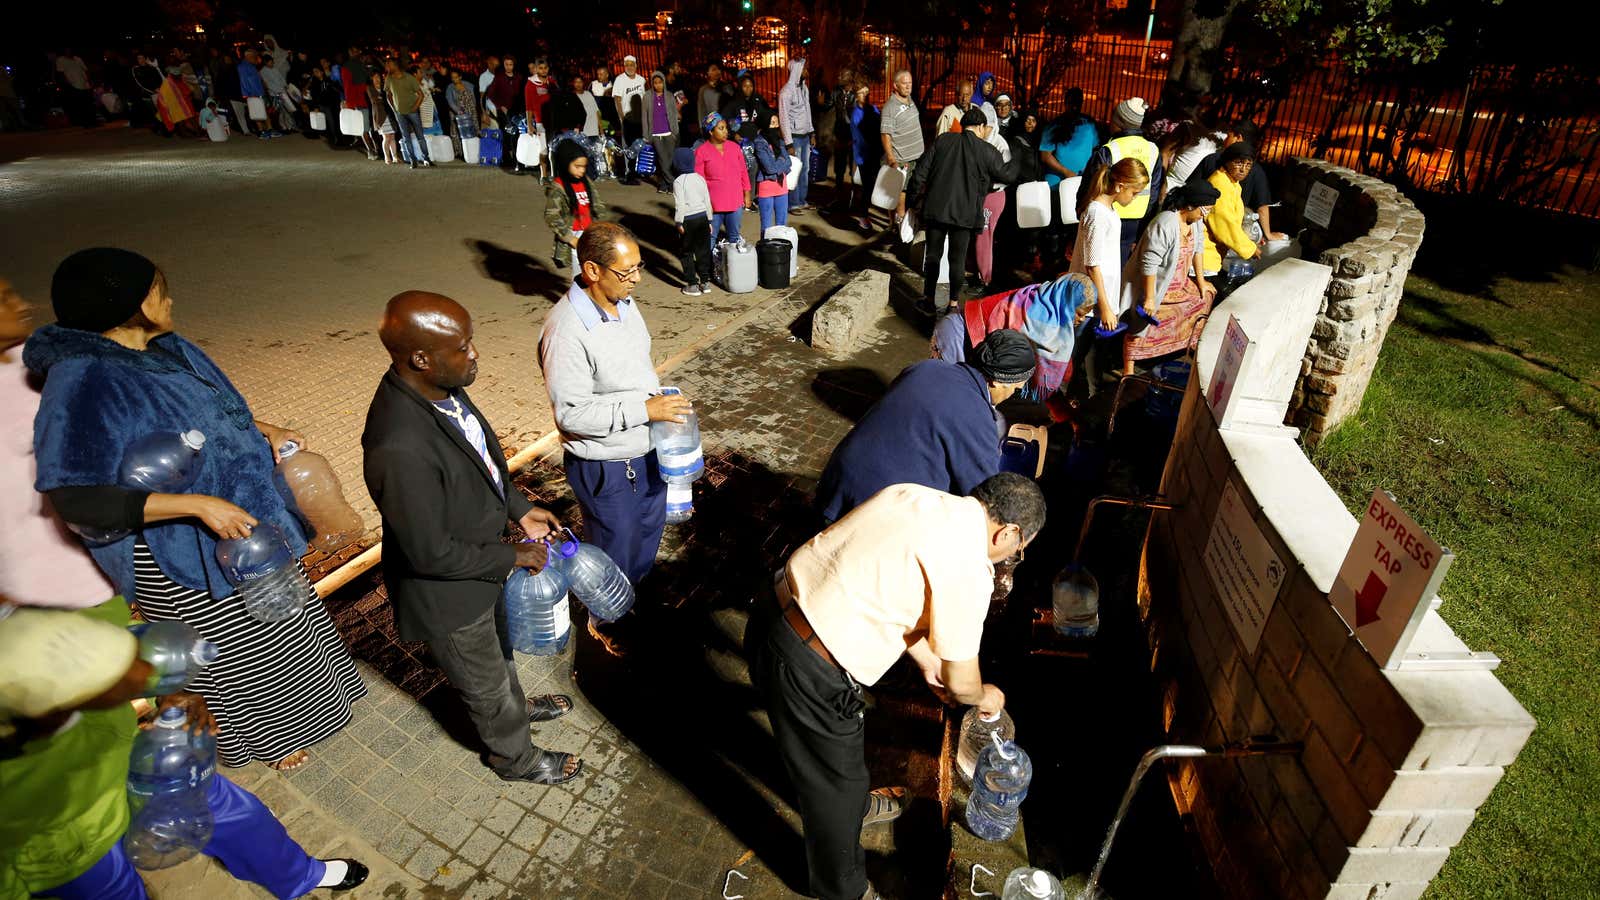 People queue to collect water from a spring in the Newlands suburb of Cape Town